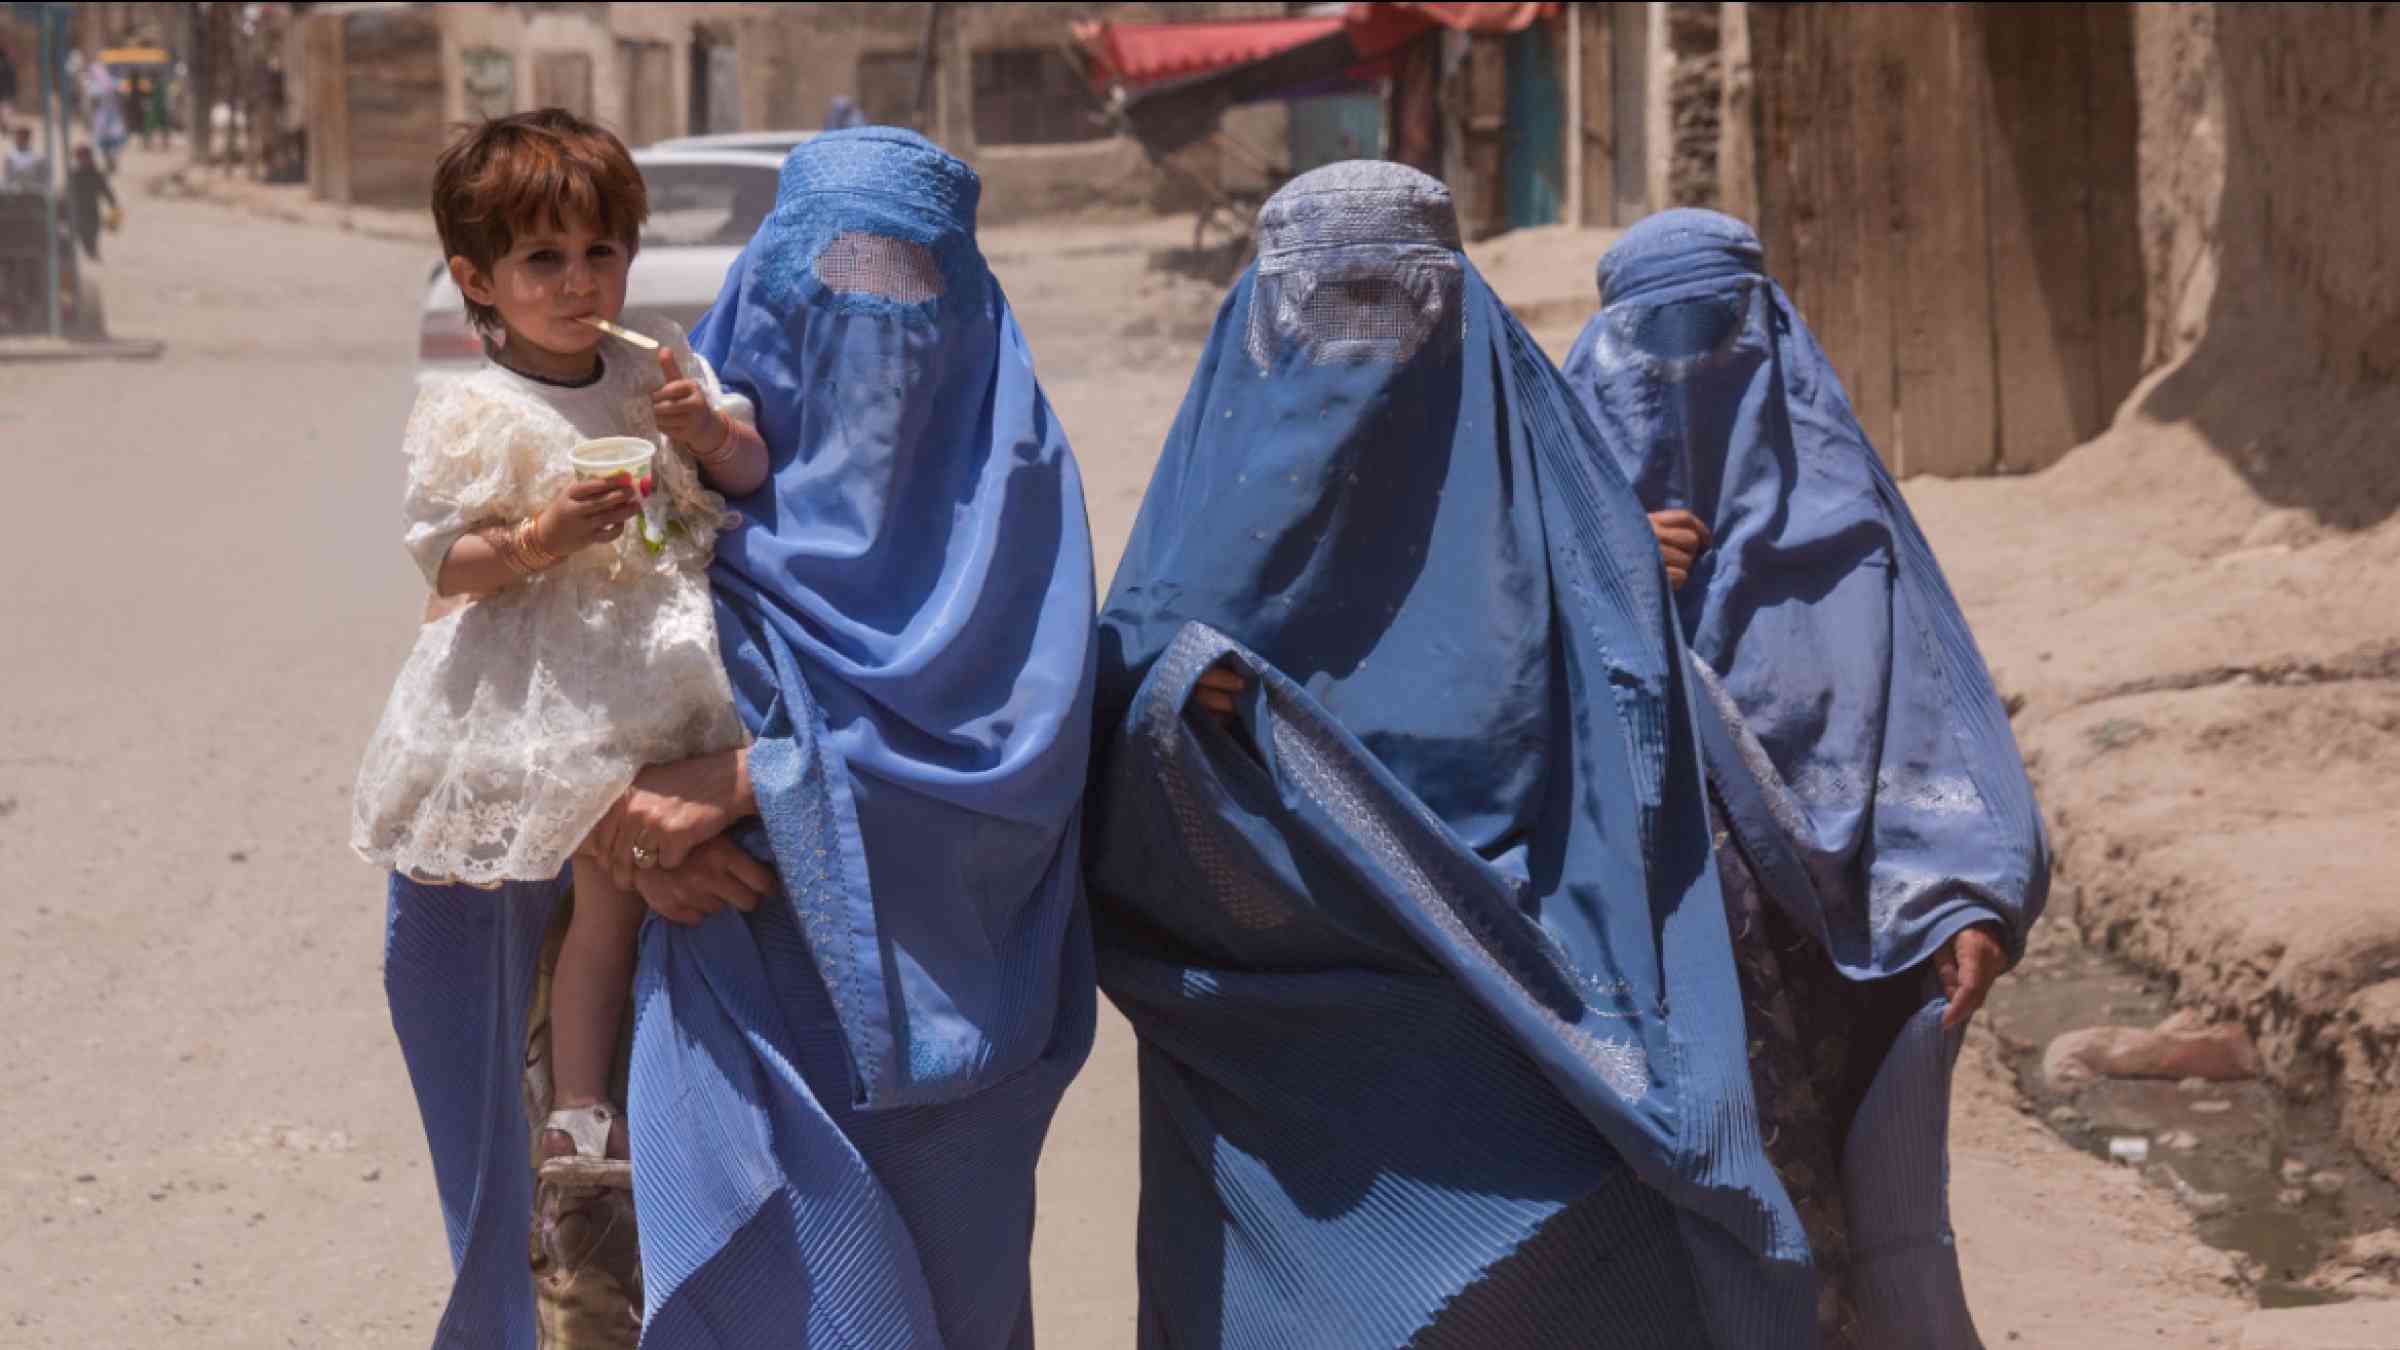 Women in burqas in Kabul walking with a child